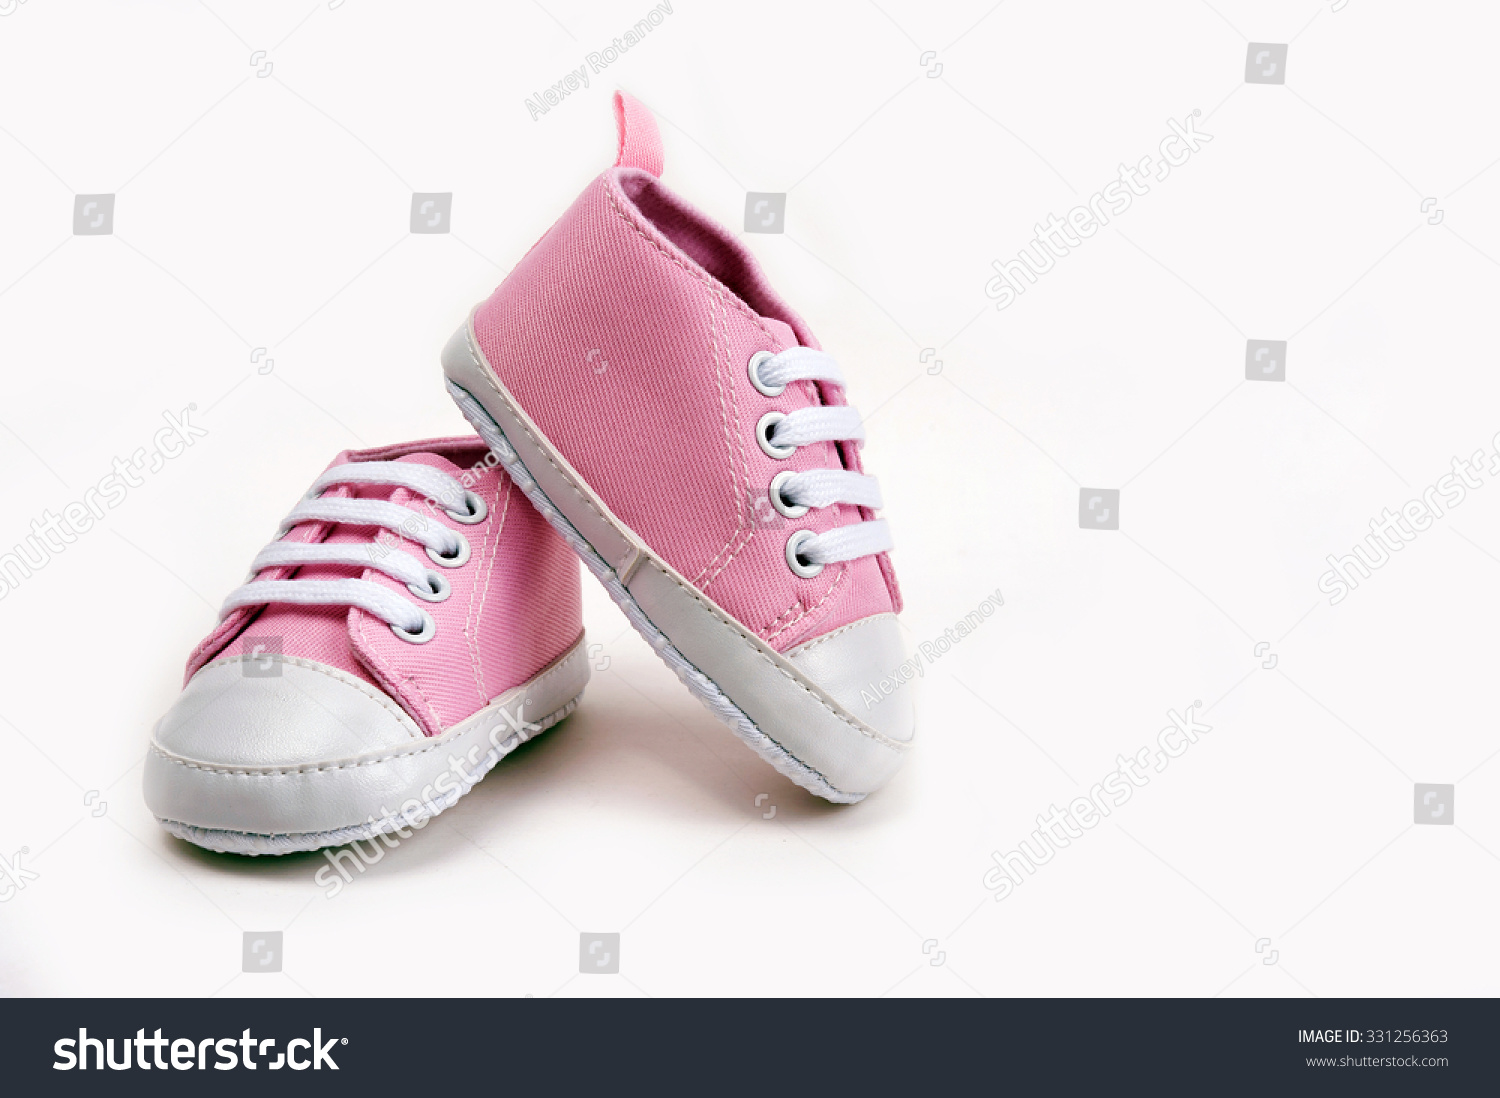 Cute pink baby girl sneakers close up on gray background #331256363